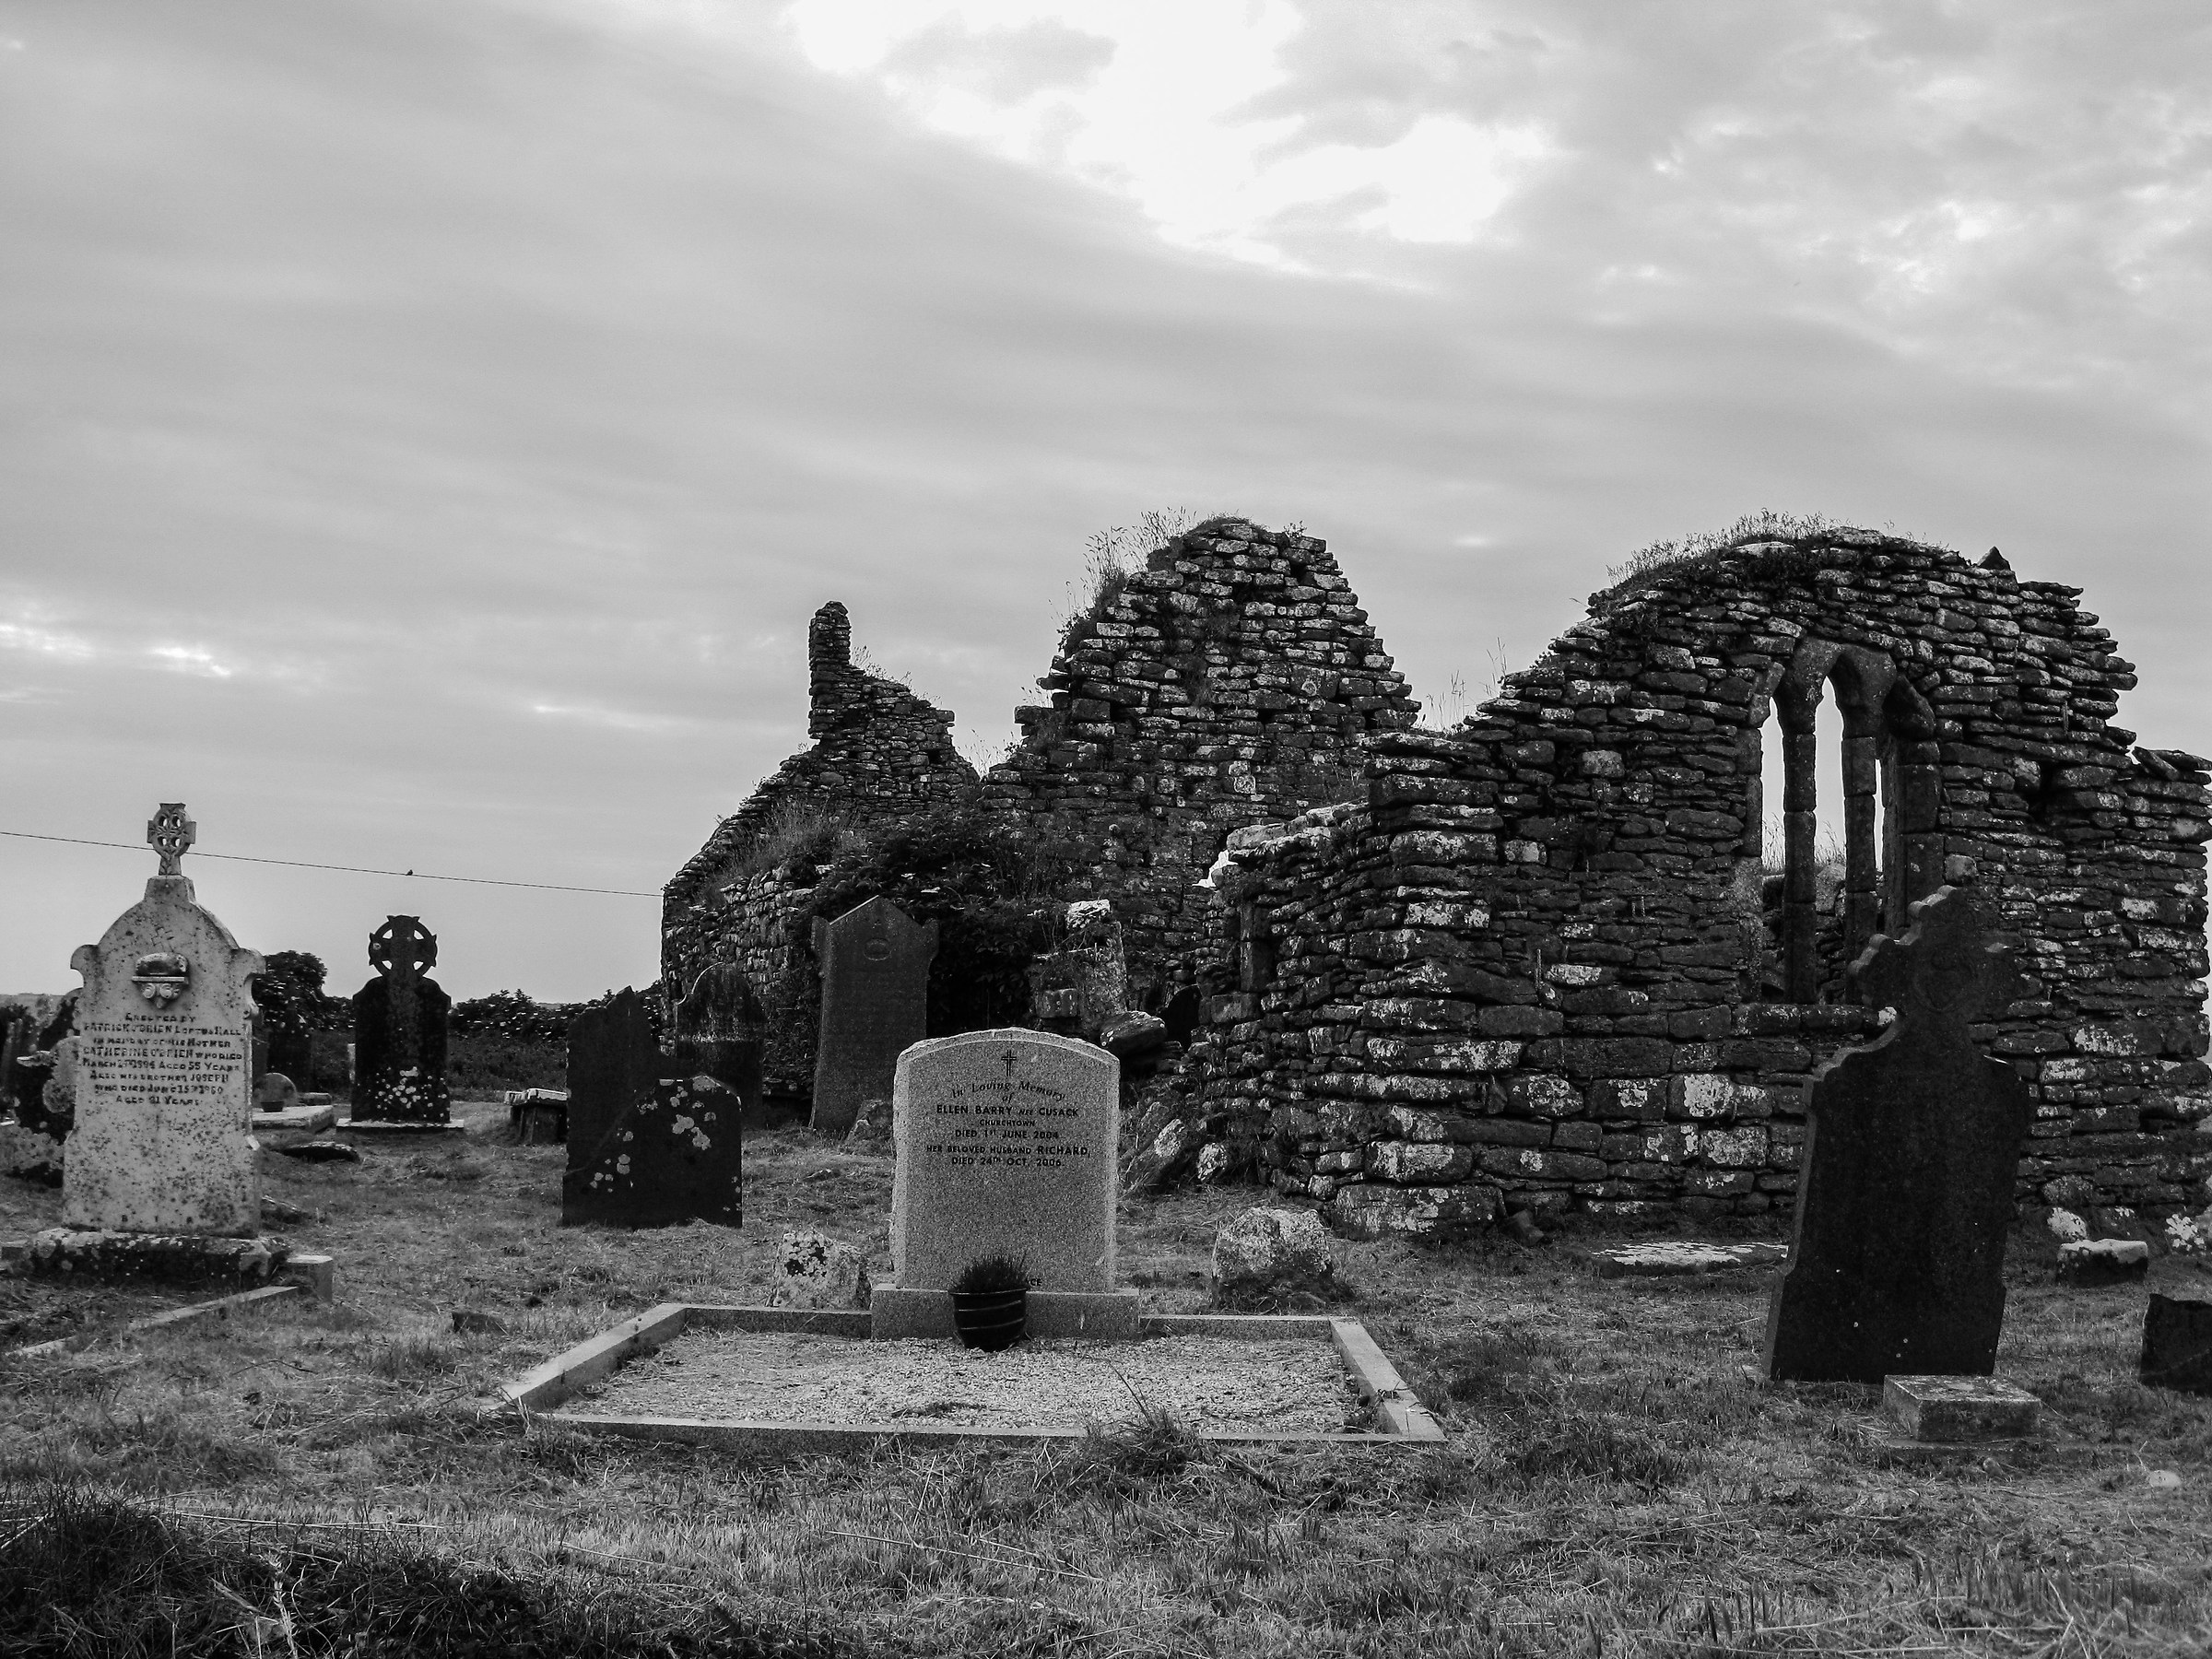 An Old cemetary in Eire...